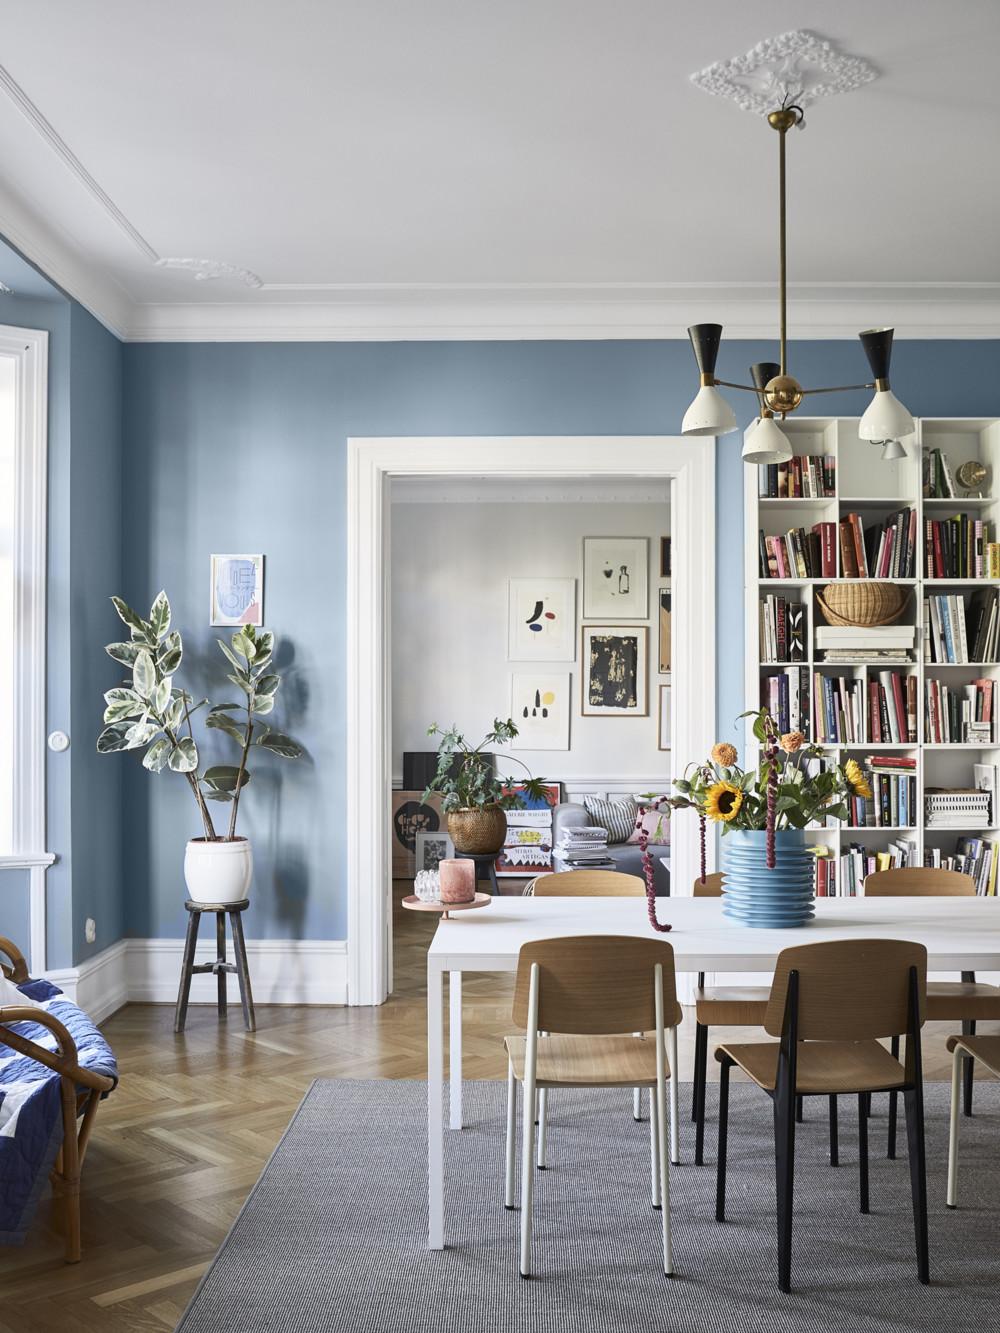 Light Blue and White Dining Room Decor Inspiration| Blue is a really versatile colour to decorate your home with. But, which colours and tones work well? What kind of accessories work with blue? This post gives you ideas for pulling together an elegant blue colour palette and pieces for your home. Read more: kittyandb.com #blueroom #livingroom #BlueAndWhite #colourfulhomedecor #bluecolorpalette #blueaesthetic